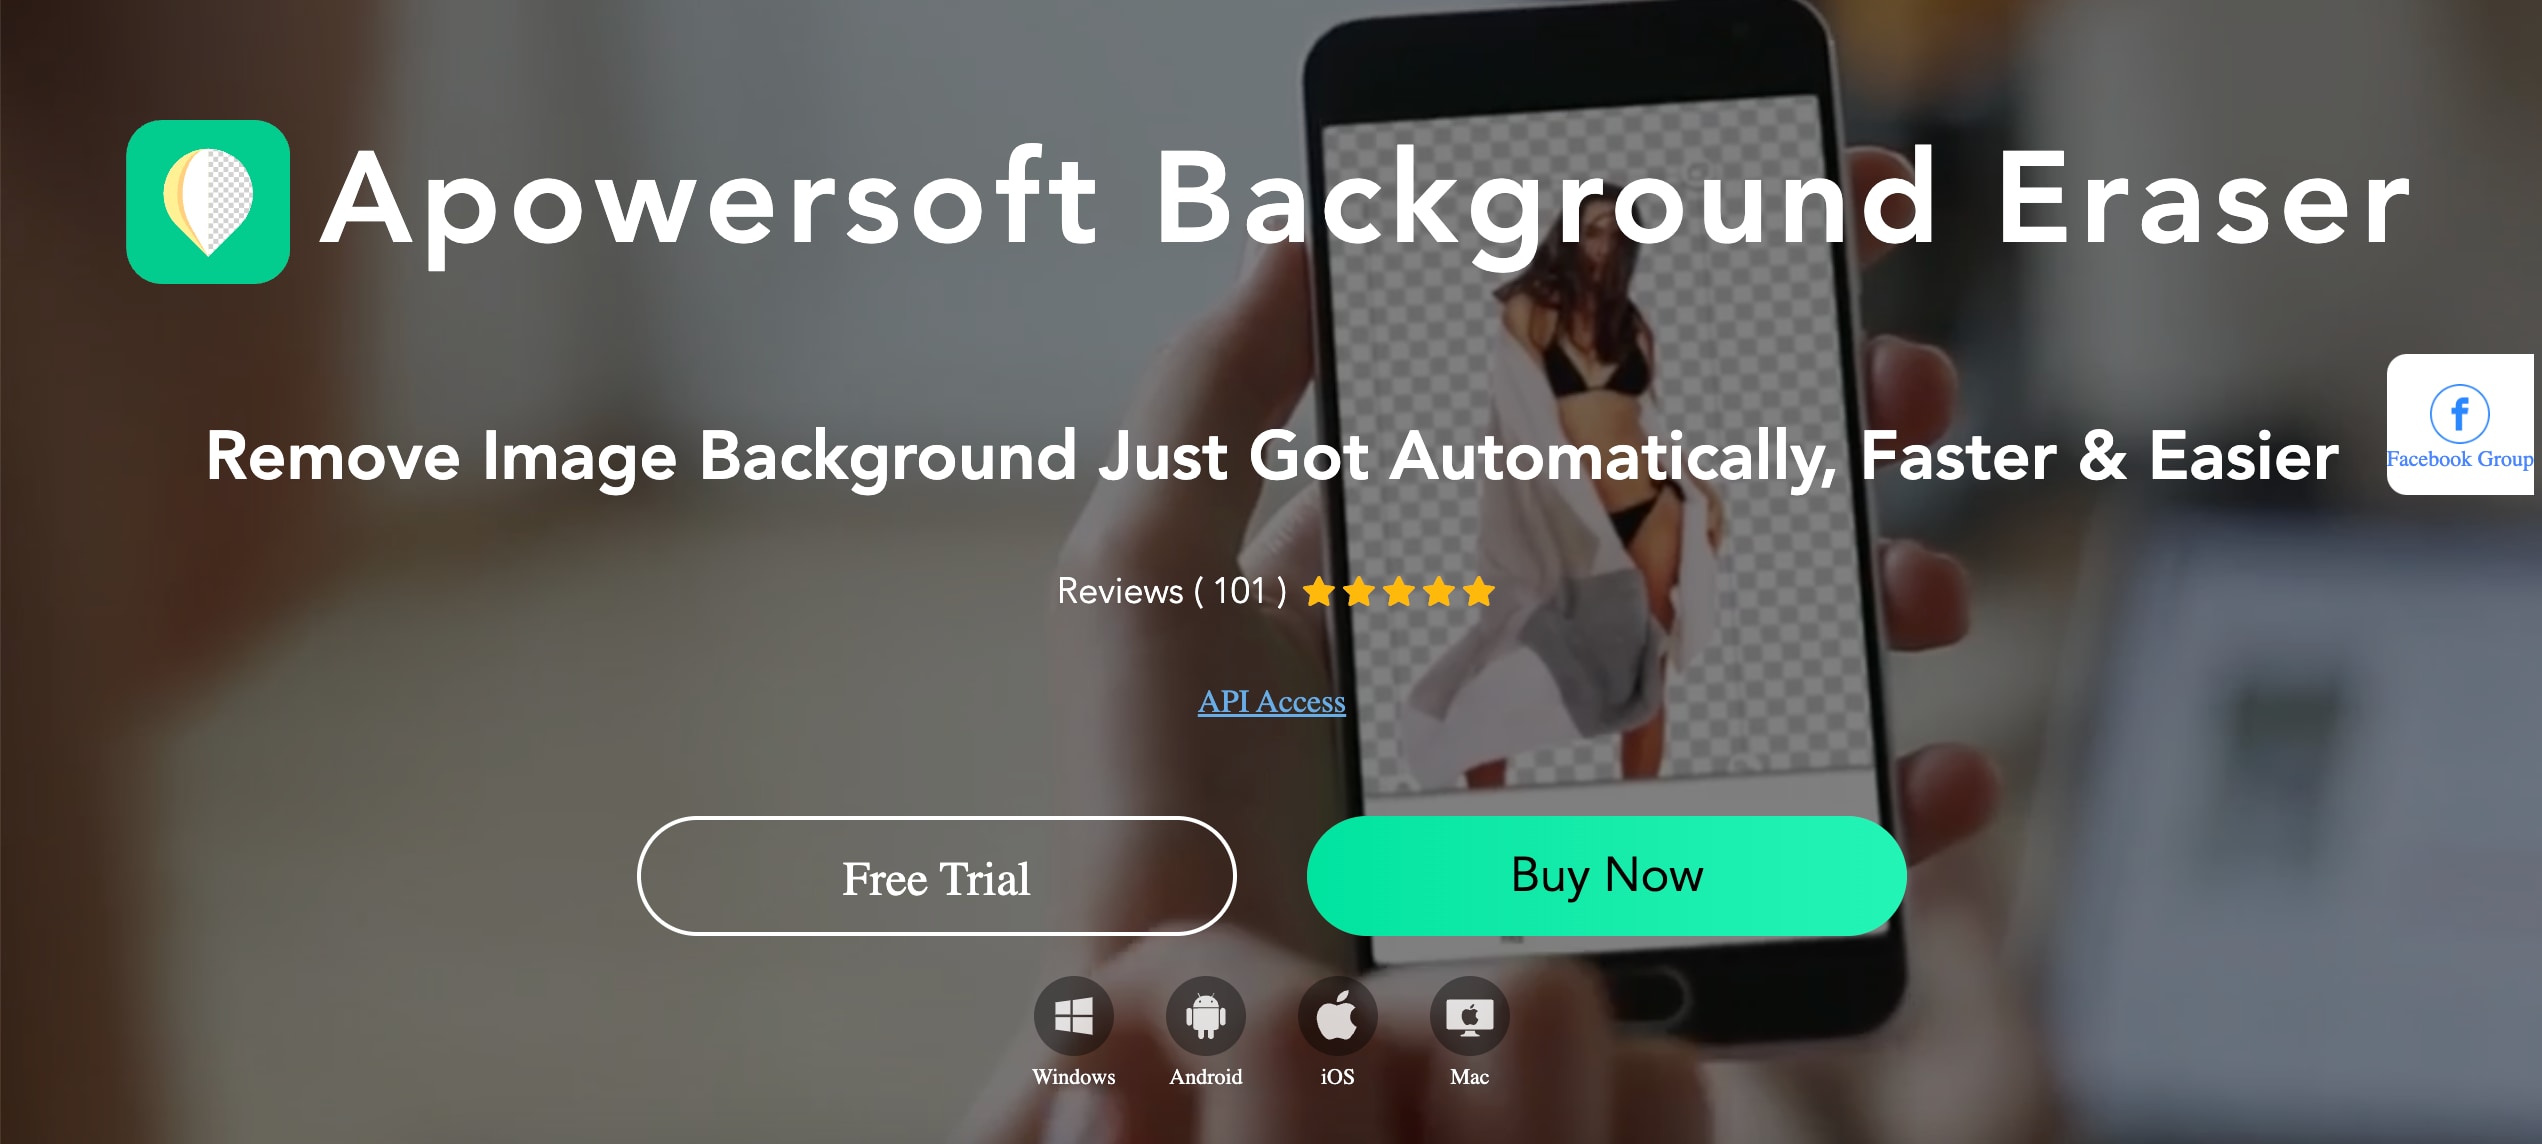 17 Best Background Remover Apps to Remove Image Background Easily